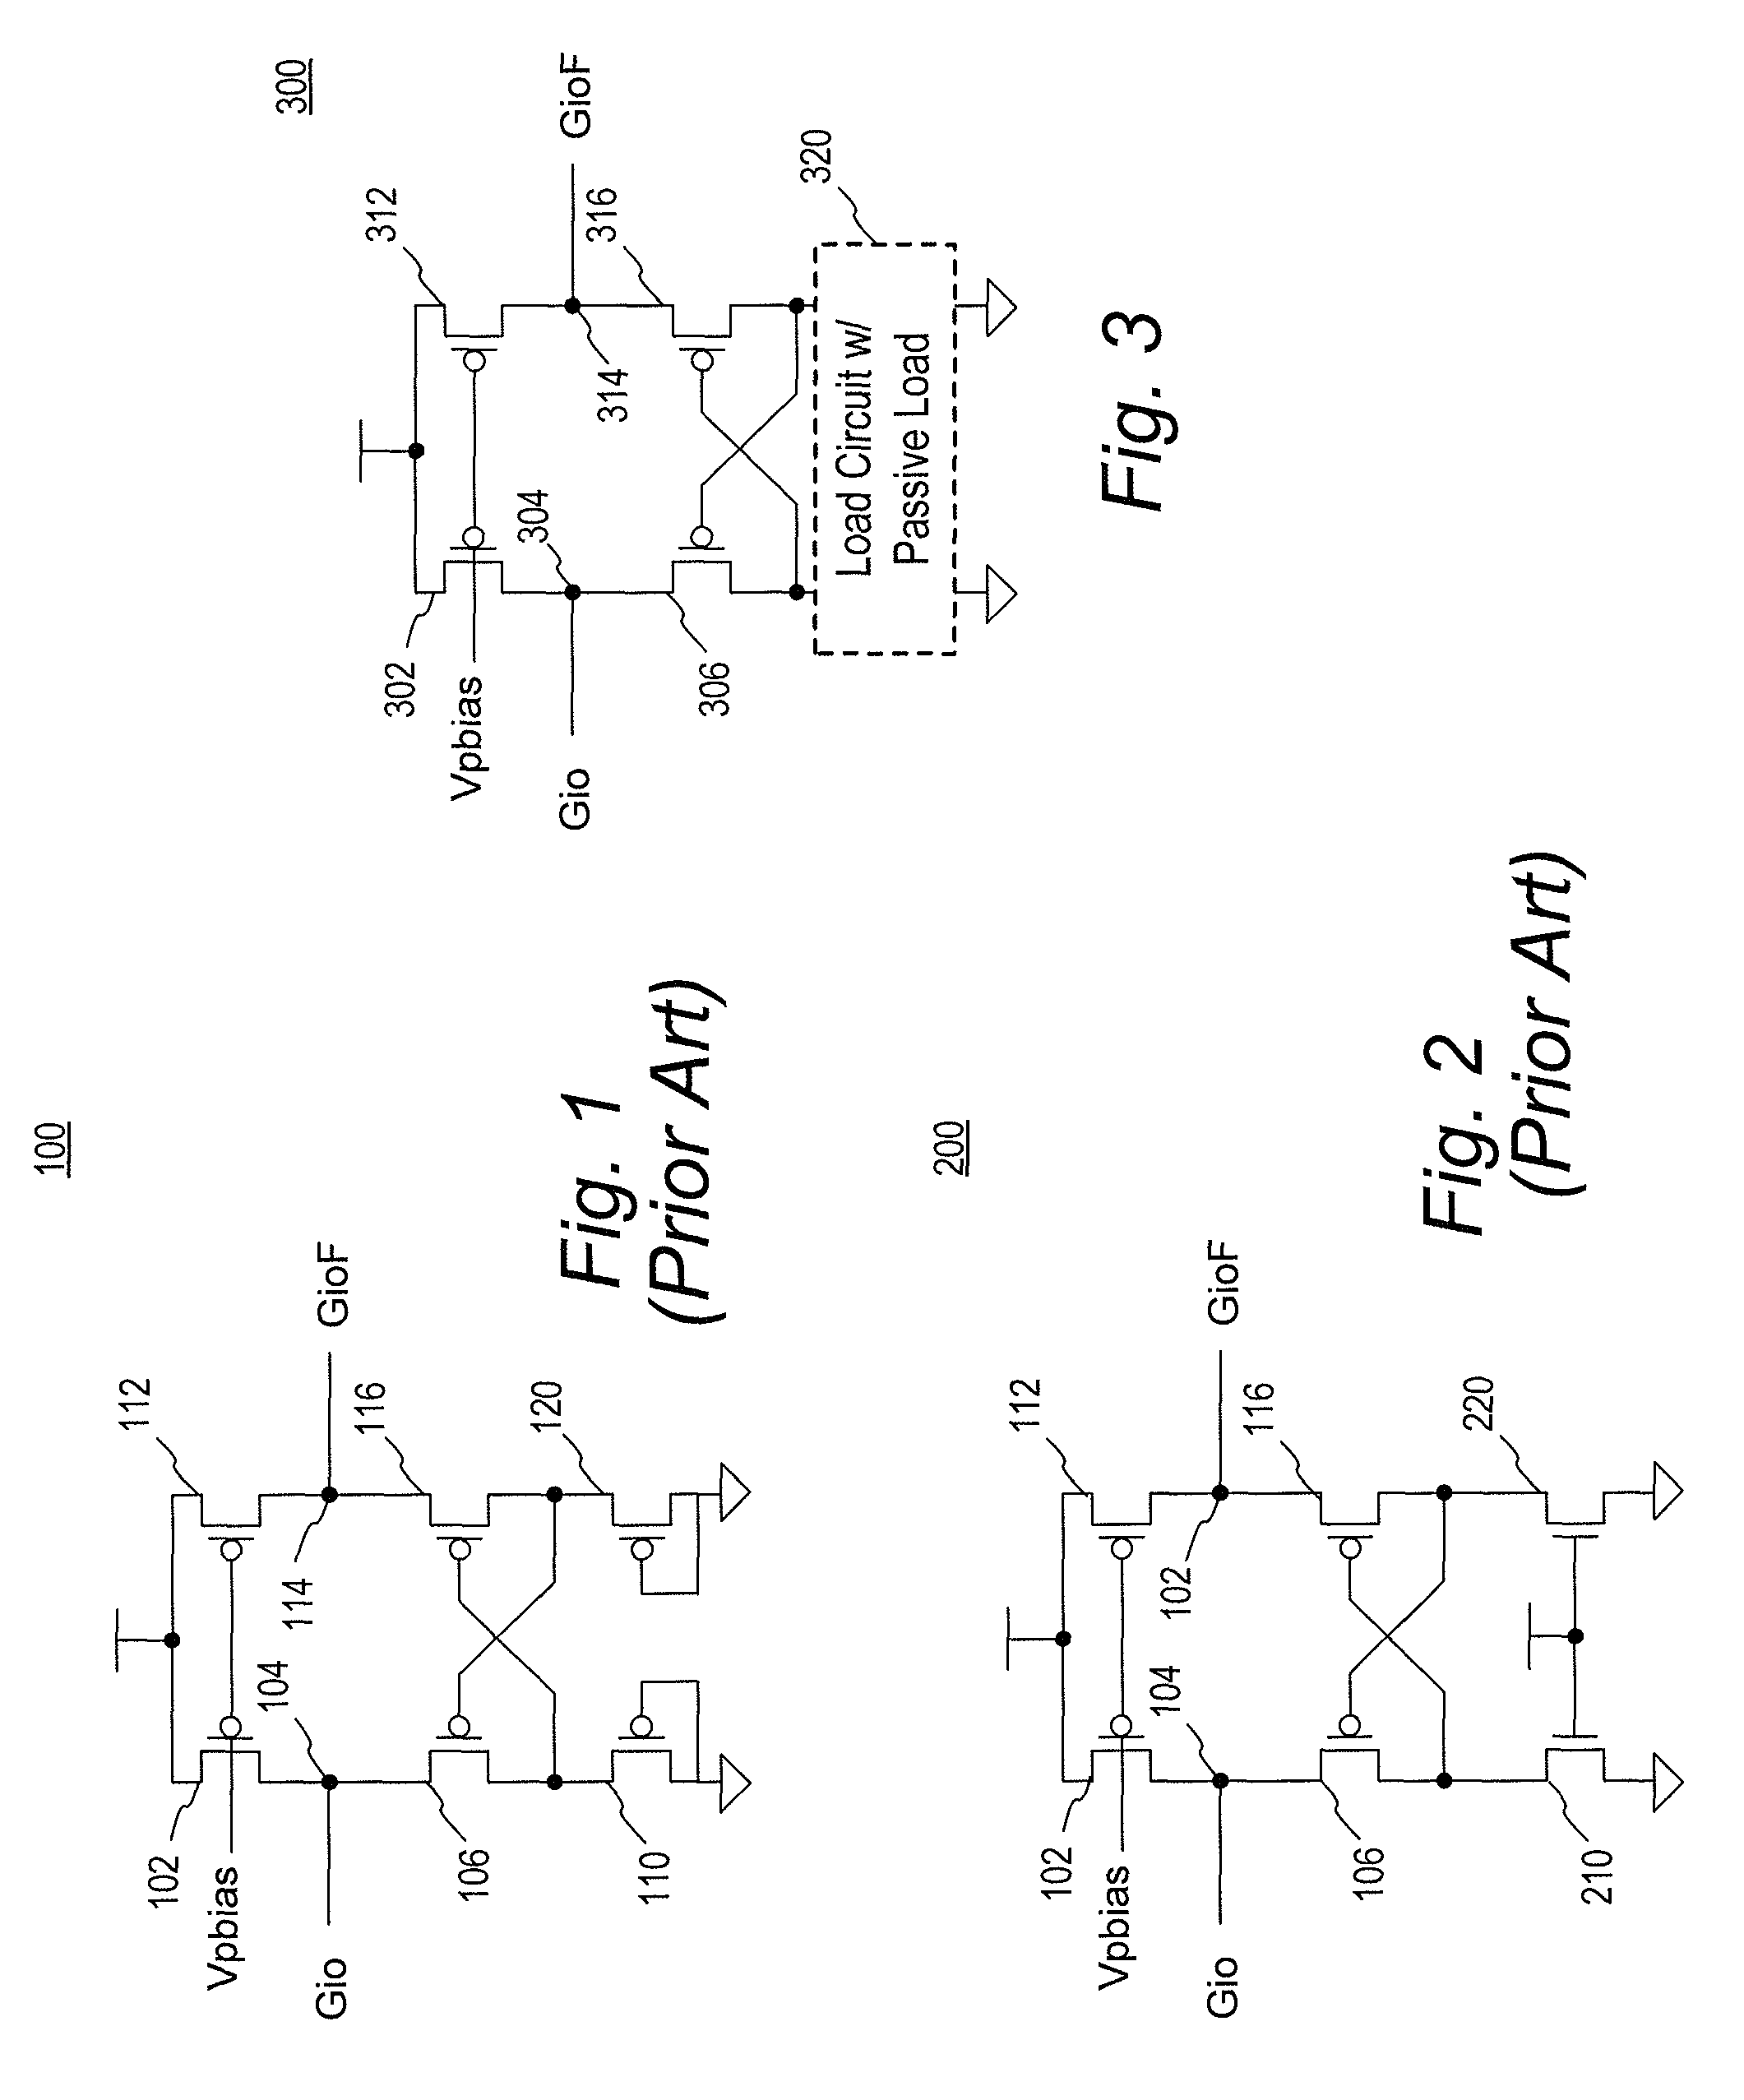 Current mode sense amplifier with passive load